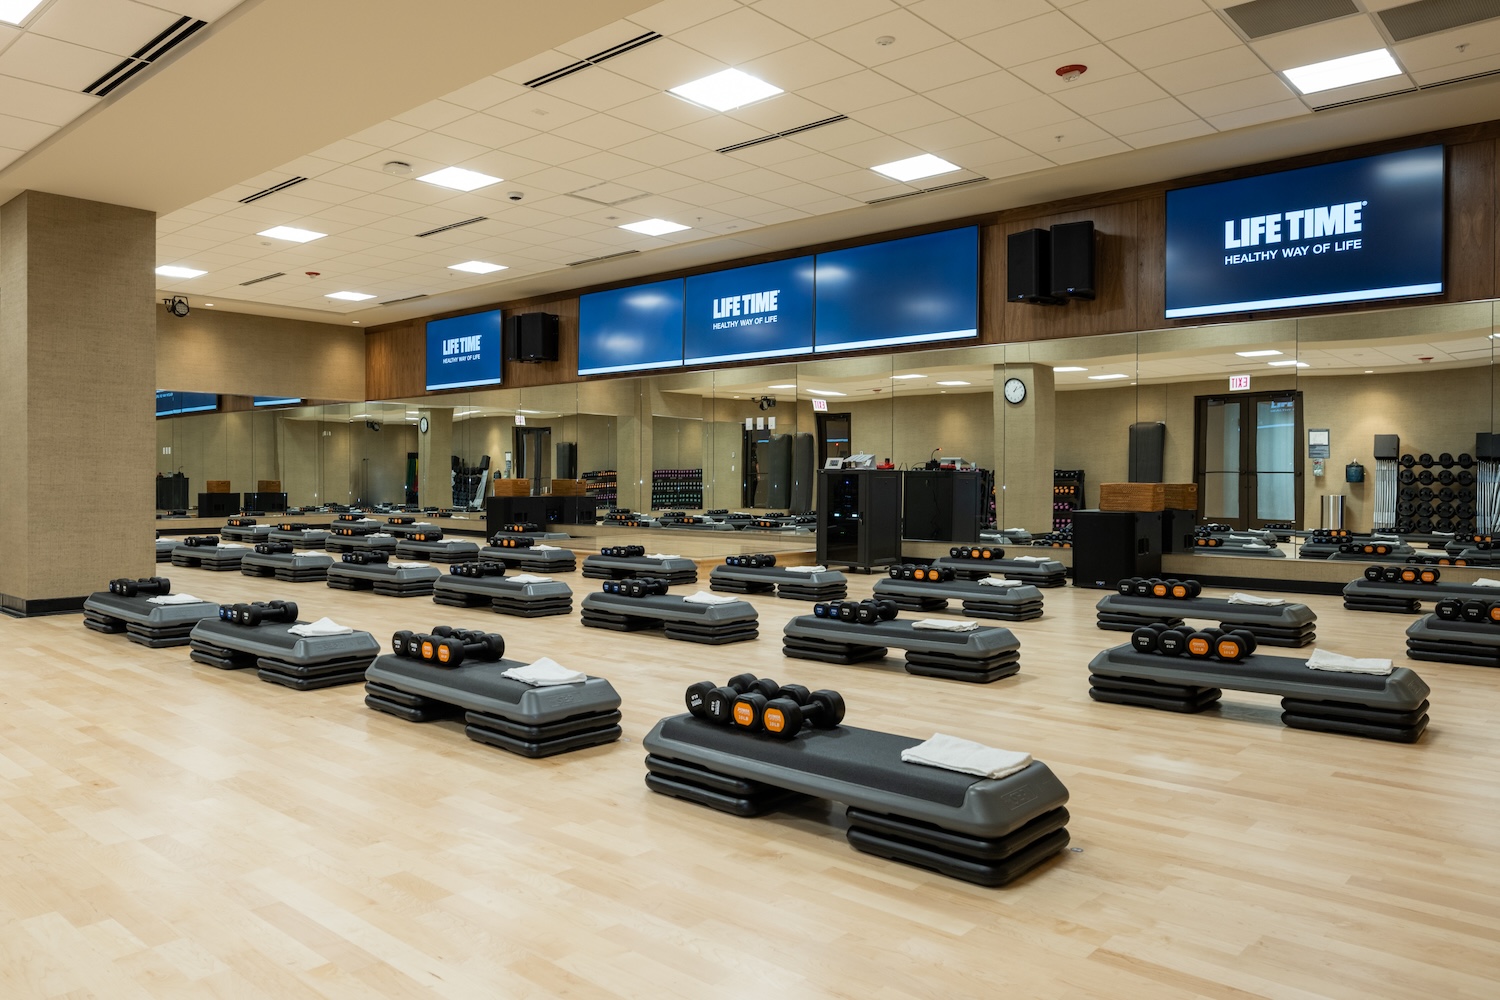 weights on machines on a wooden floor, tvs hanging, speakers, mirrors